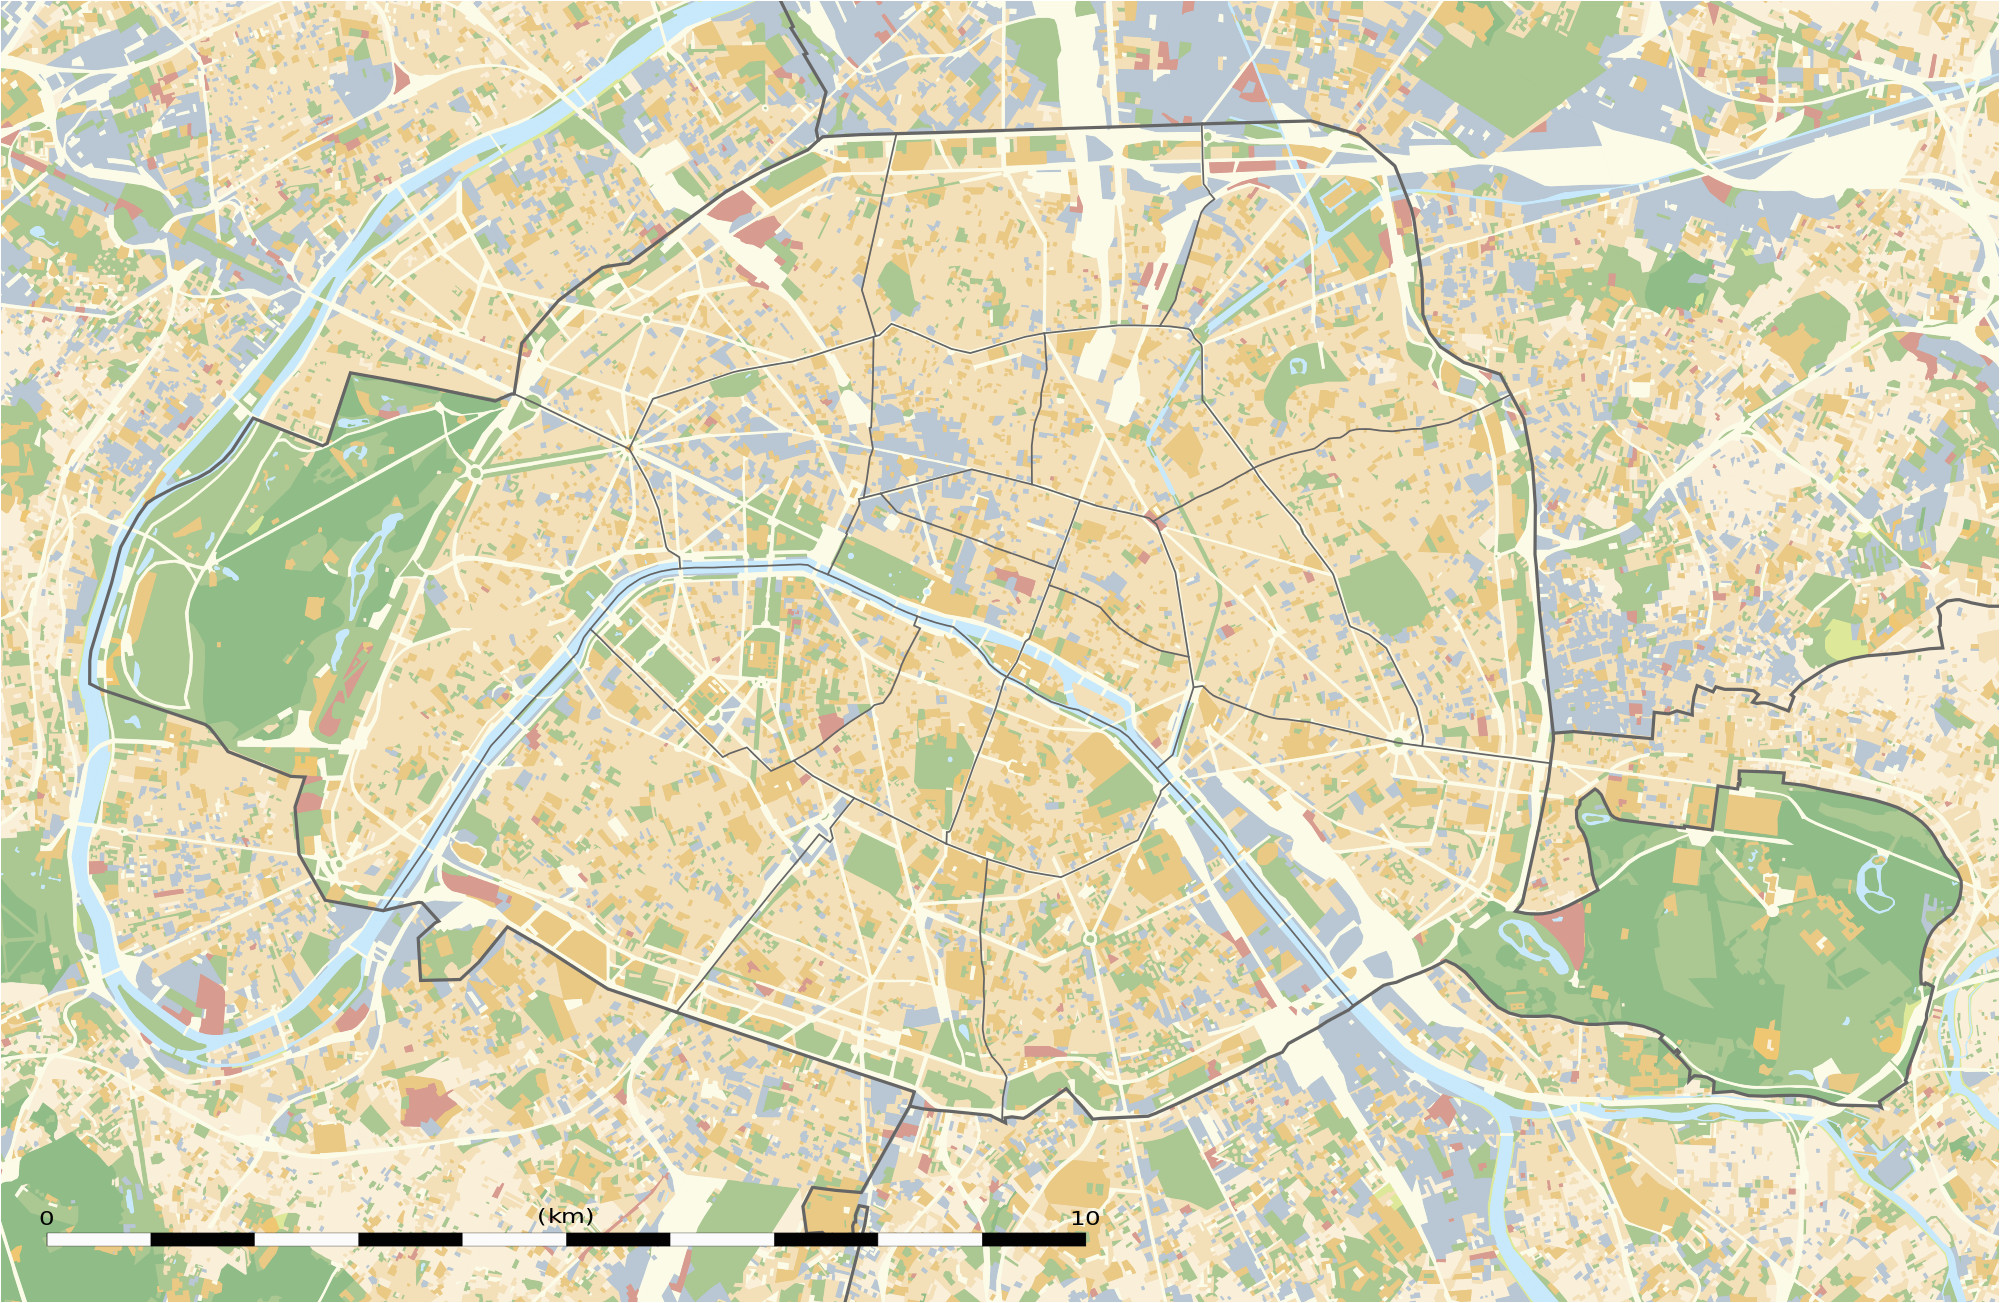 A Map Of Paris France Maps Of Paris Wikimedia Commons